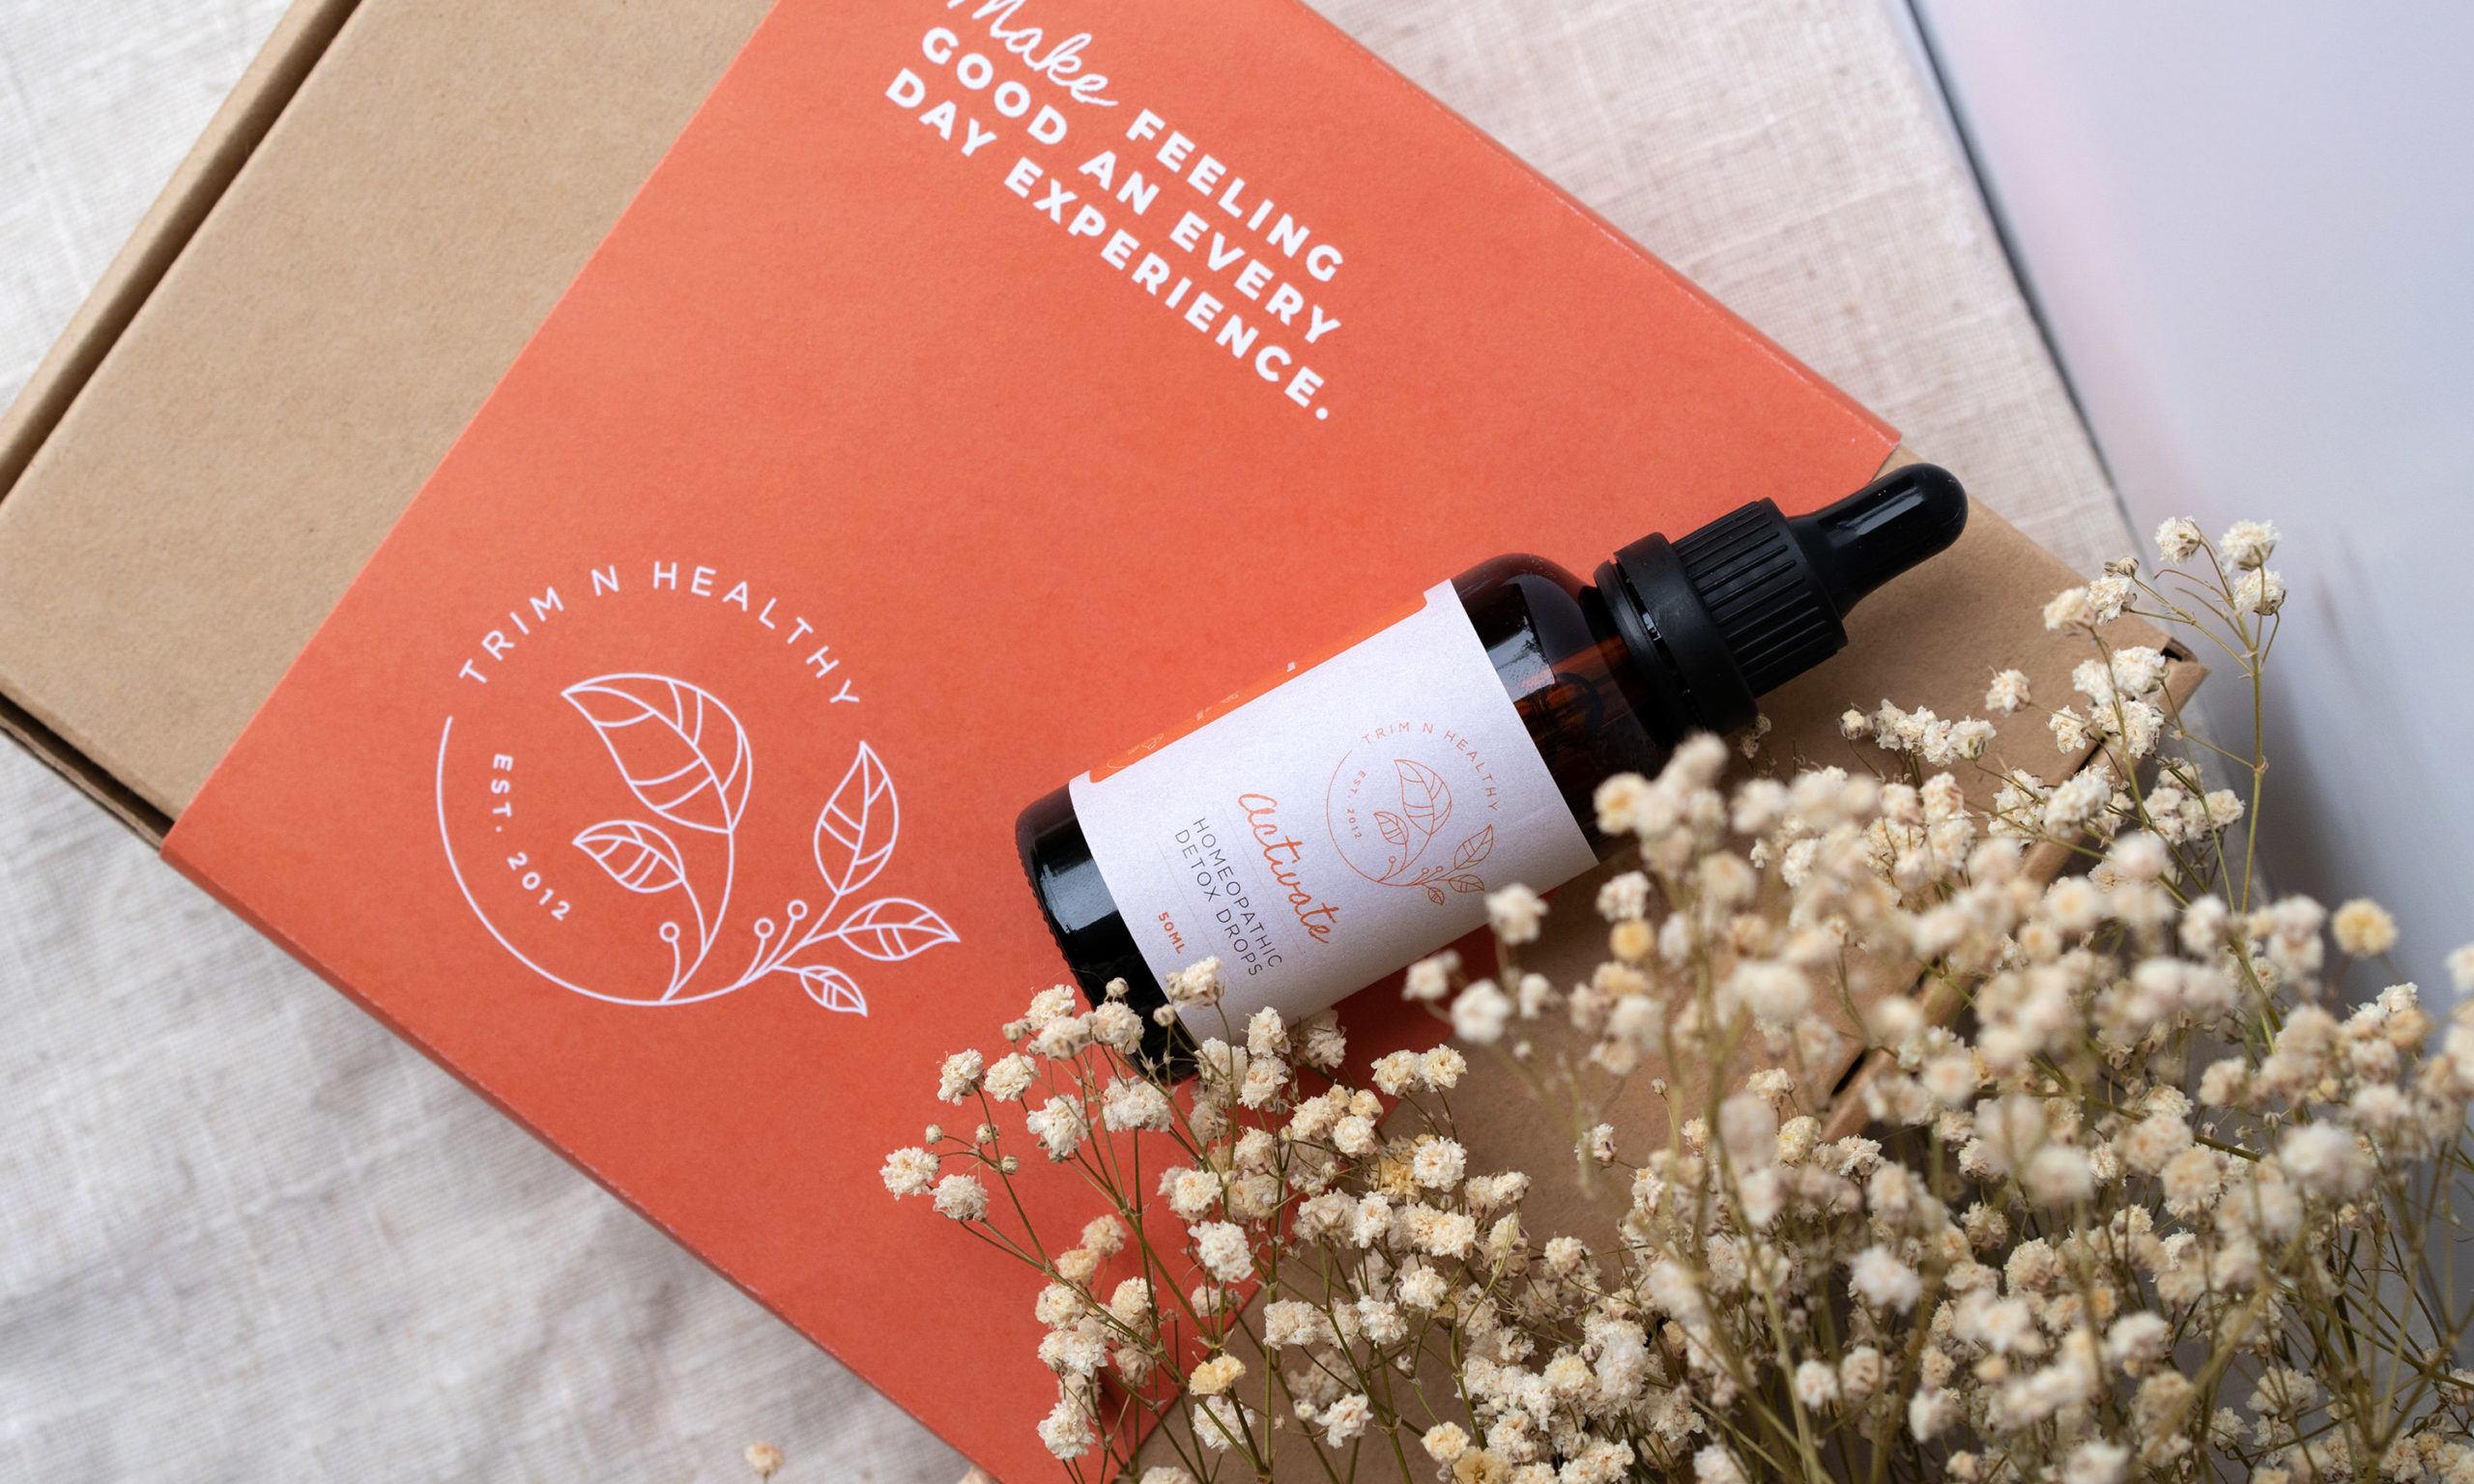 Trim N Healthy natural weight loss Activate drops with white flowers and a coral coloured card that reads Make feeling good an every day experience.